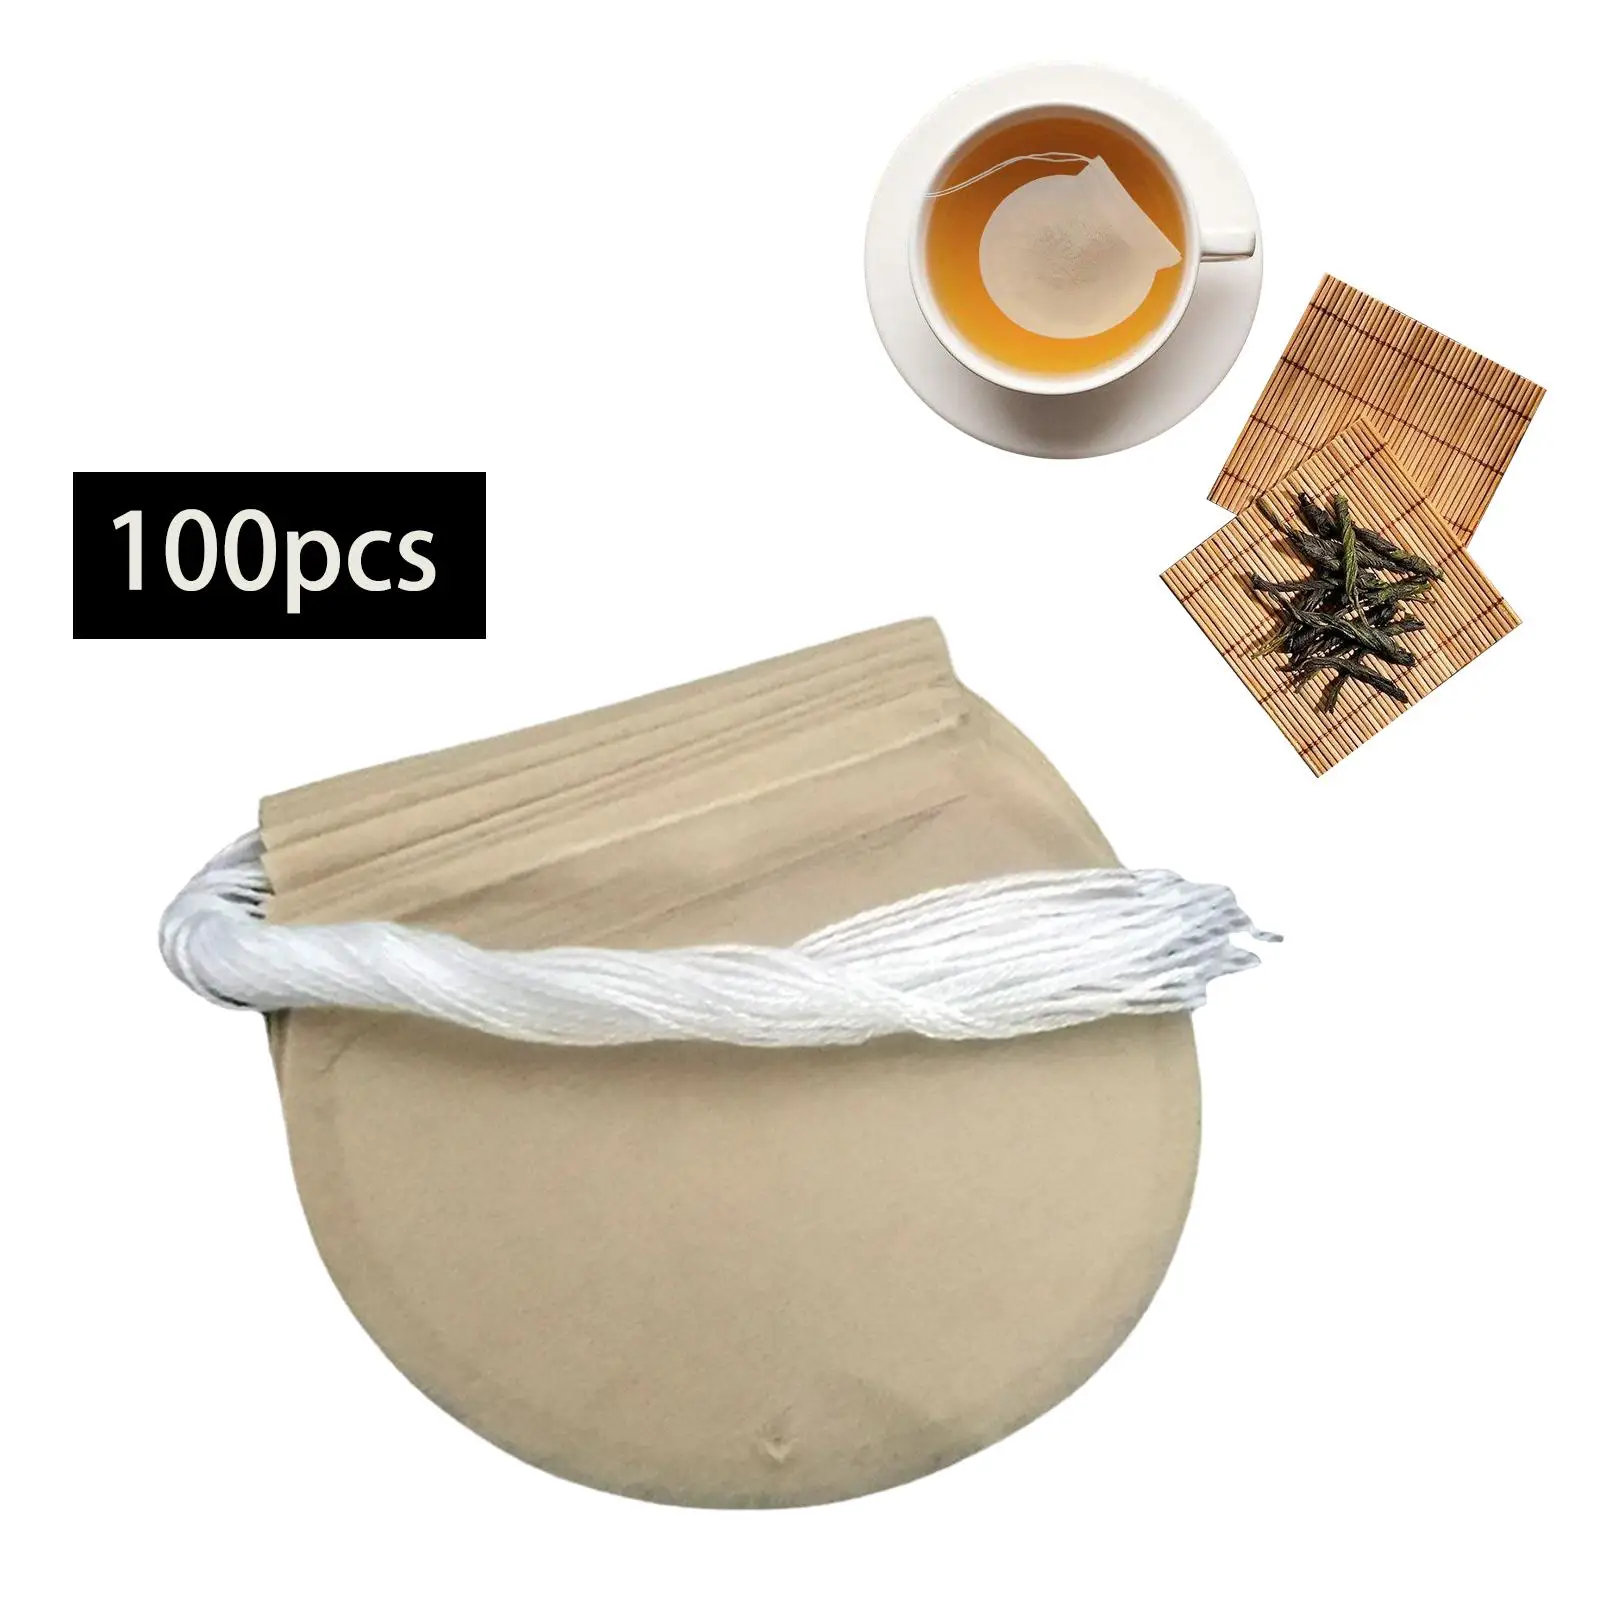 100Pcs Tea Filter Bags Pepper Spices Tea Infuser with Drawstring Coffee Seal Filter Bags Loose Tea Infuser Empty Tea Filter Bag